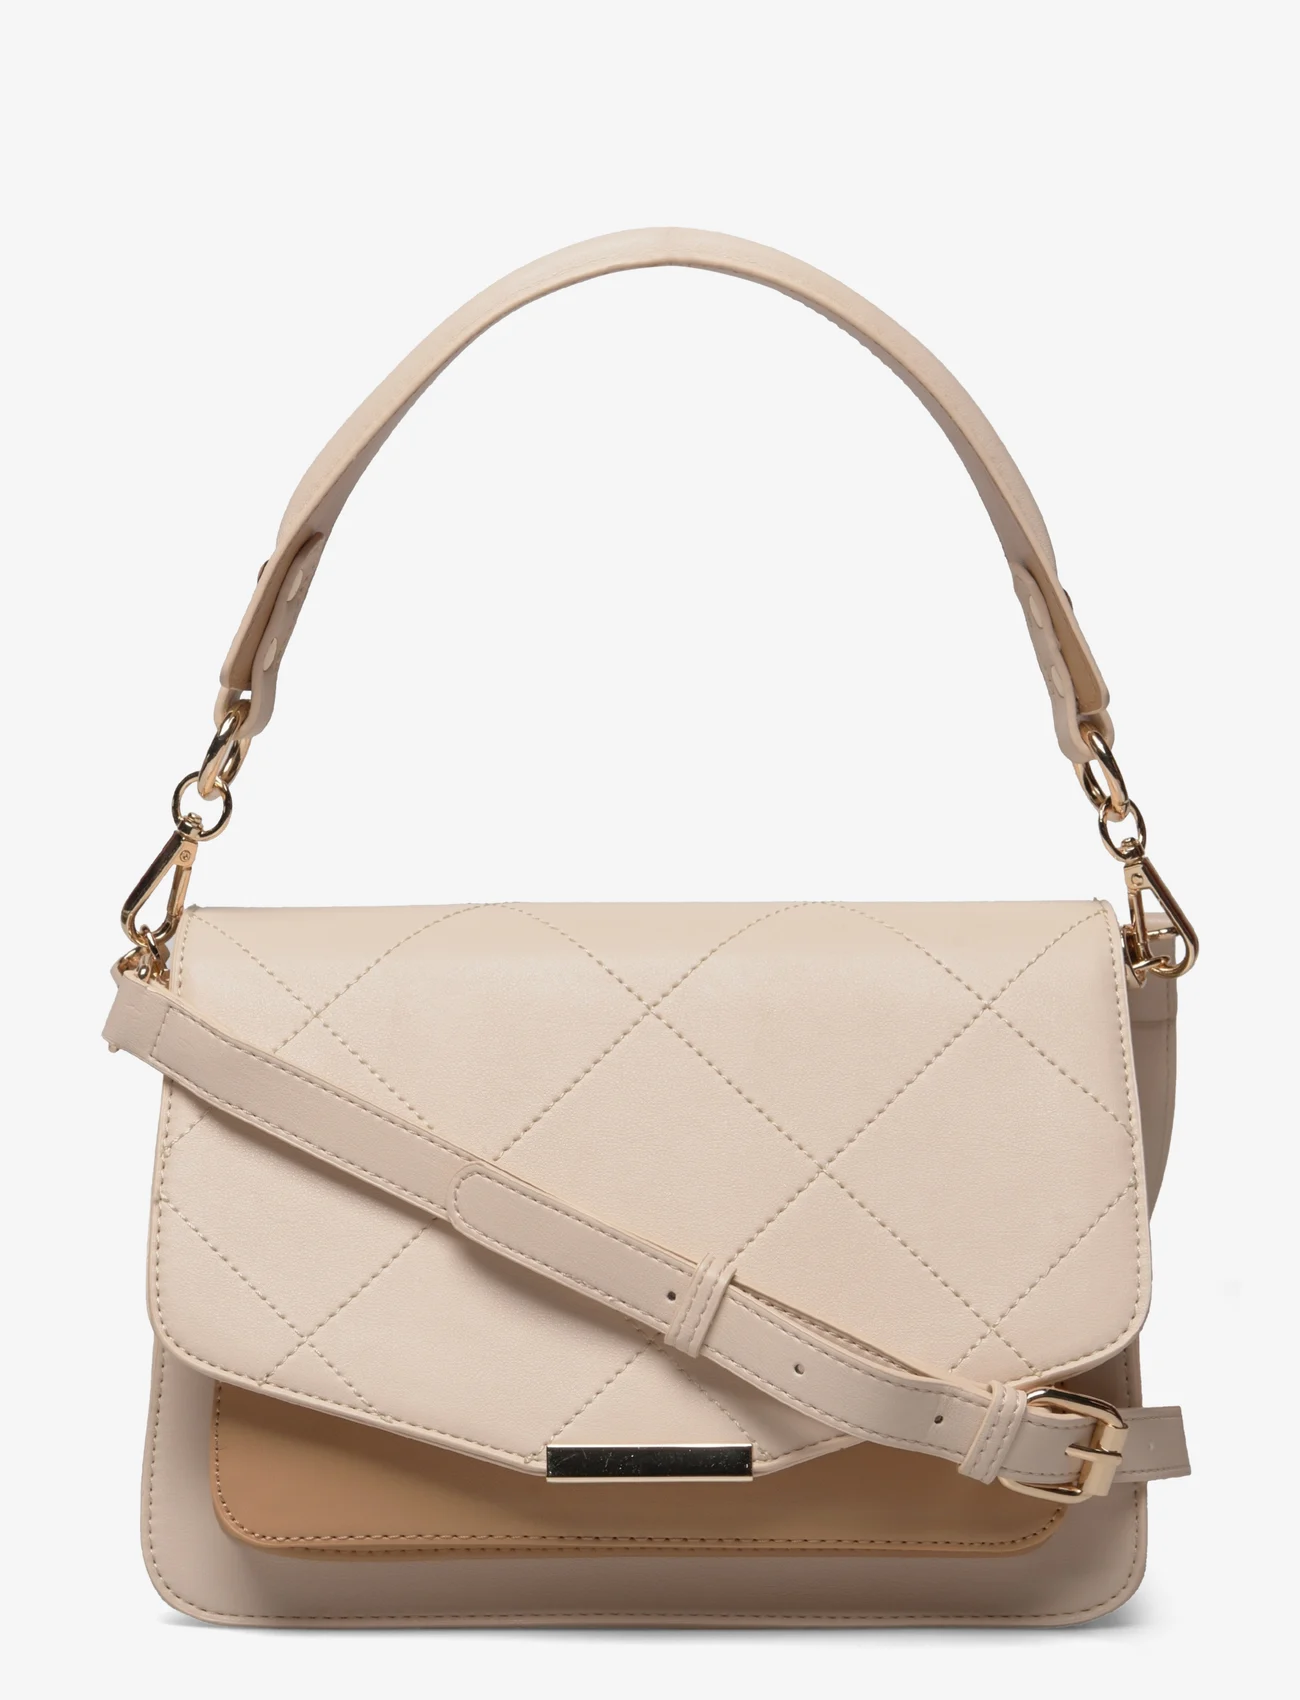 Noella - Blanca Multi Compartment Bag - party wear at outlet prices - nude leather look - 0